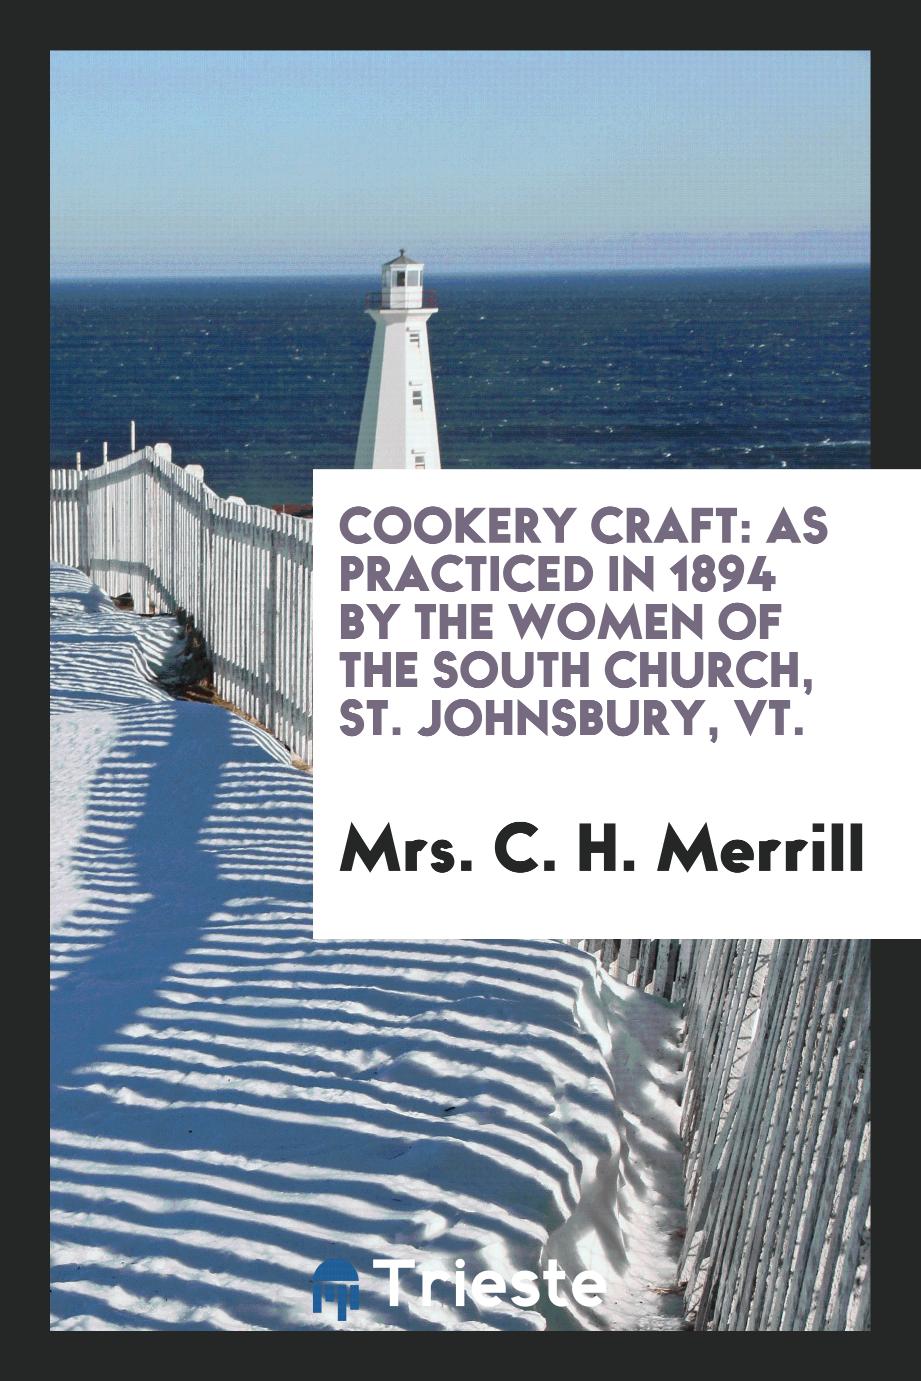 Cookery Craft: As Practiced in 1894 by the Women of the South Church, St. Johnsbury, Vt.